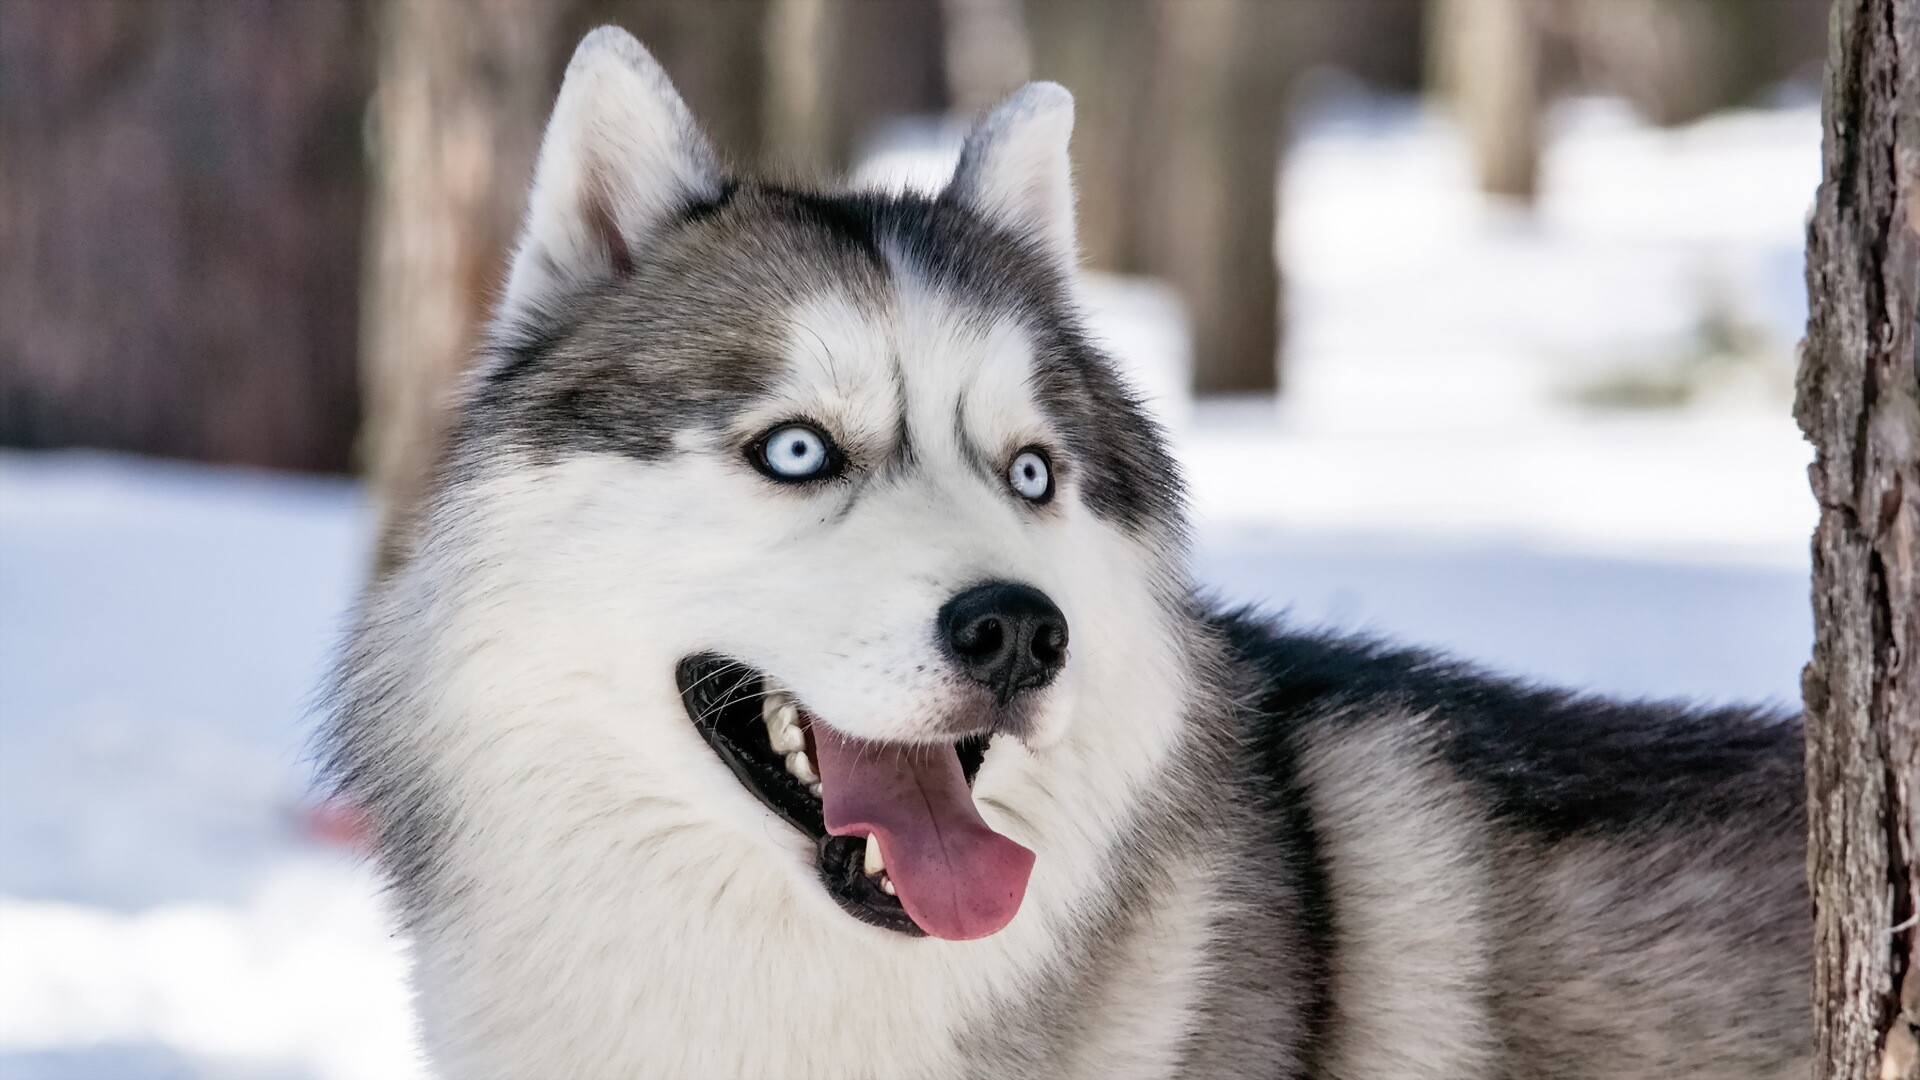 Siberian Husky: The breed was recognized by the International Canine Federation in 1966. 1920x1080 Full HD Background.